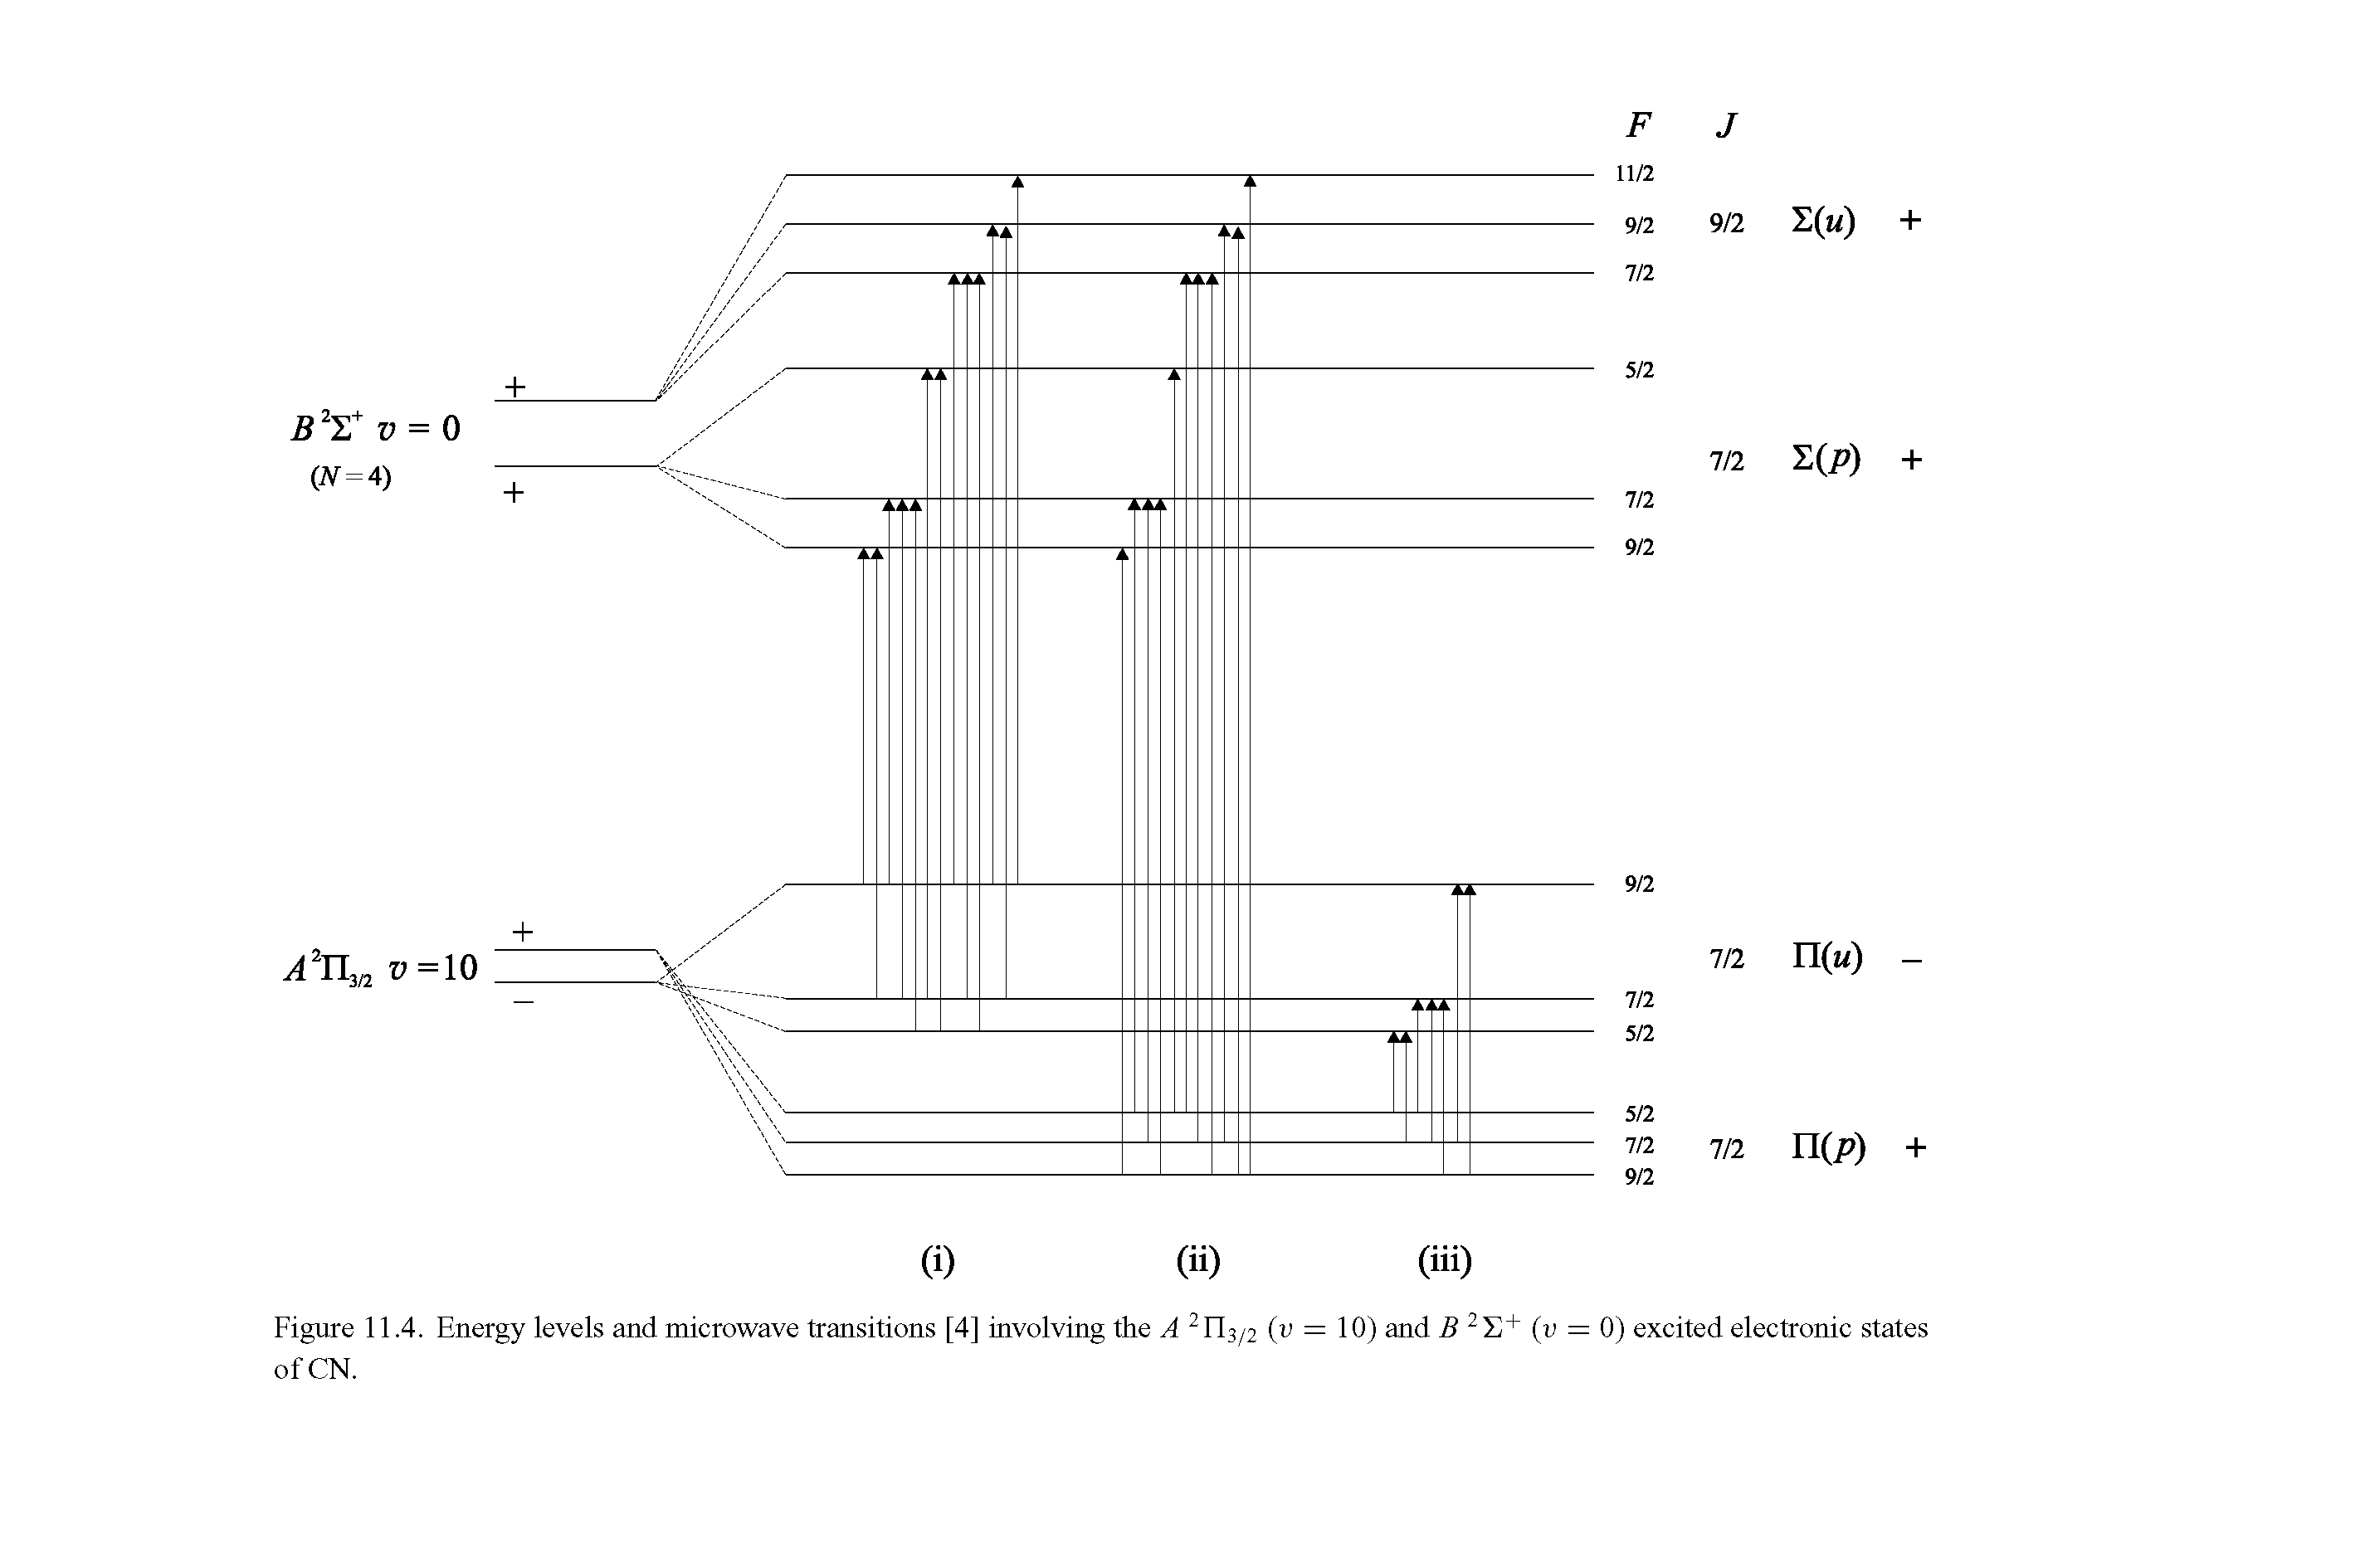 Figure 11.4. Energy levels and microwave transitions [4] involving the A 2Tl3/2 (v = 10) and B 2E+ (v = 0) excited electronic states of CN.